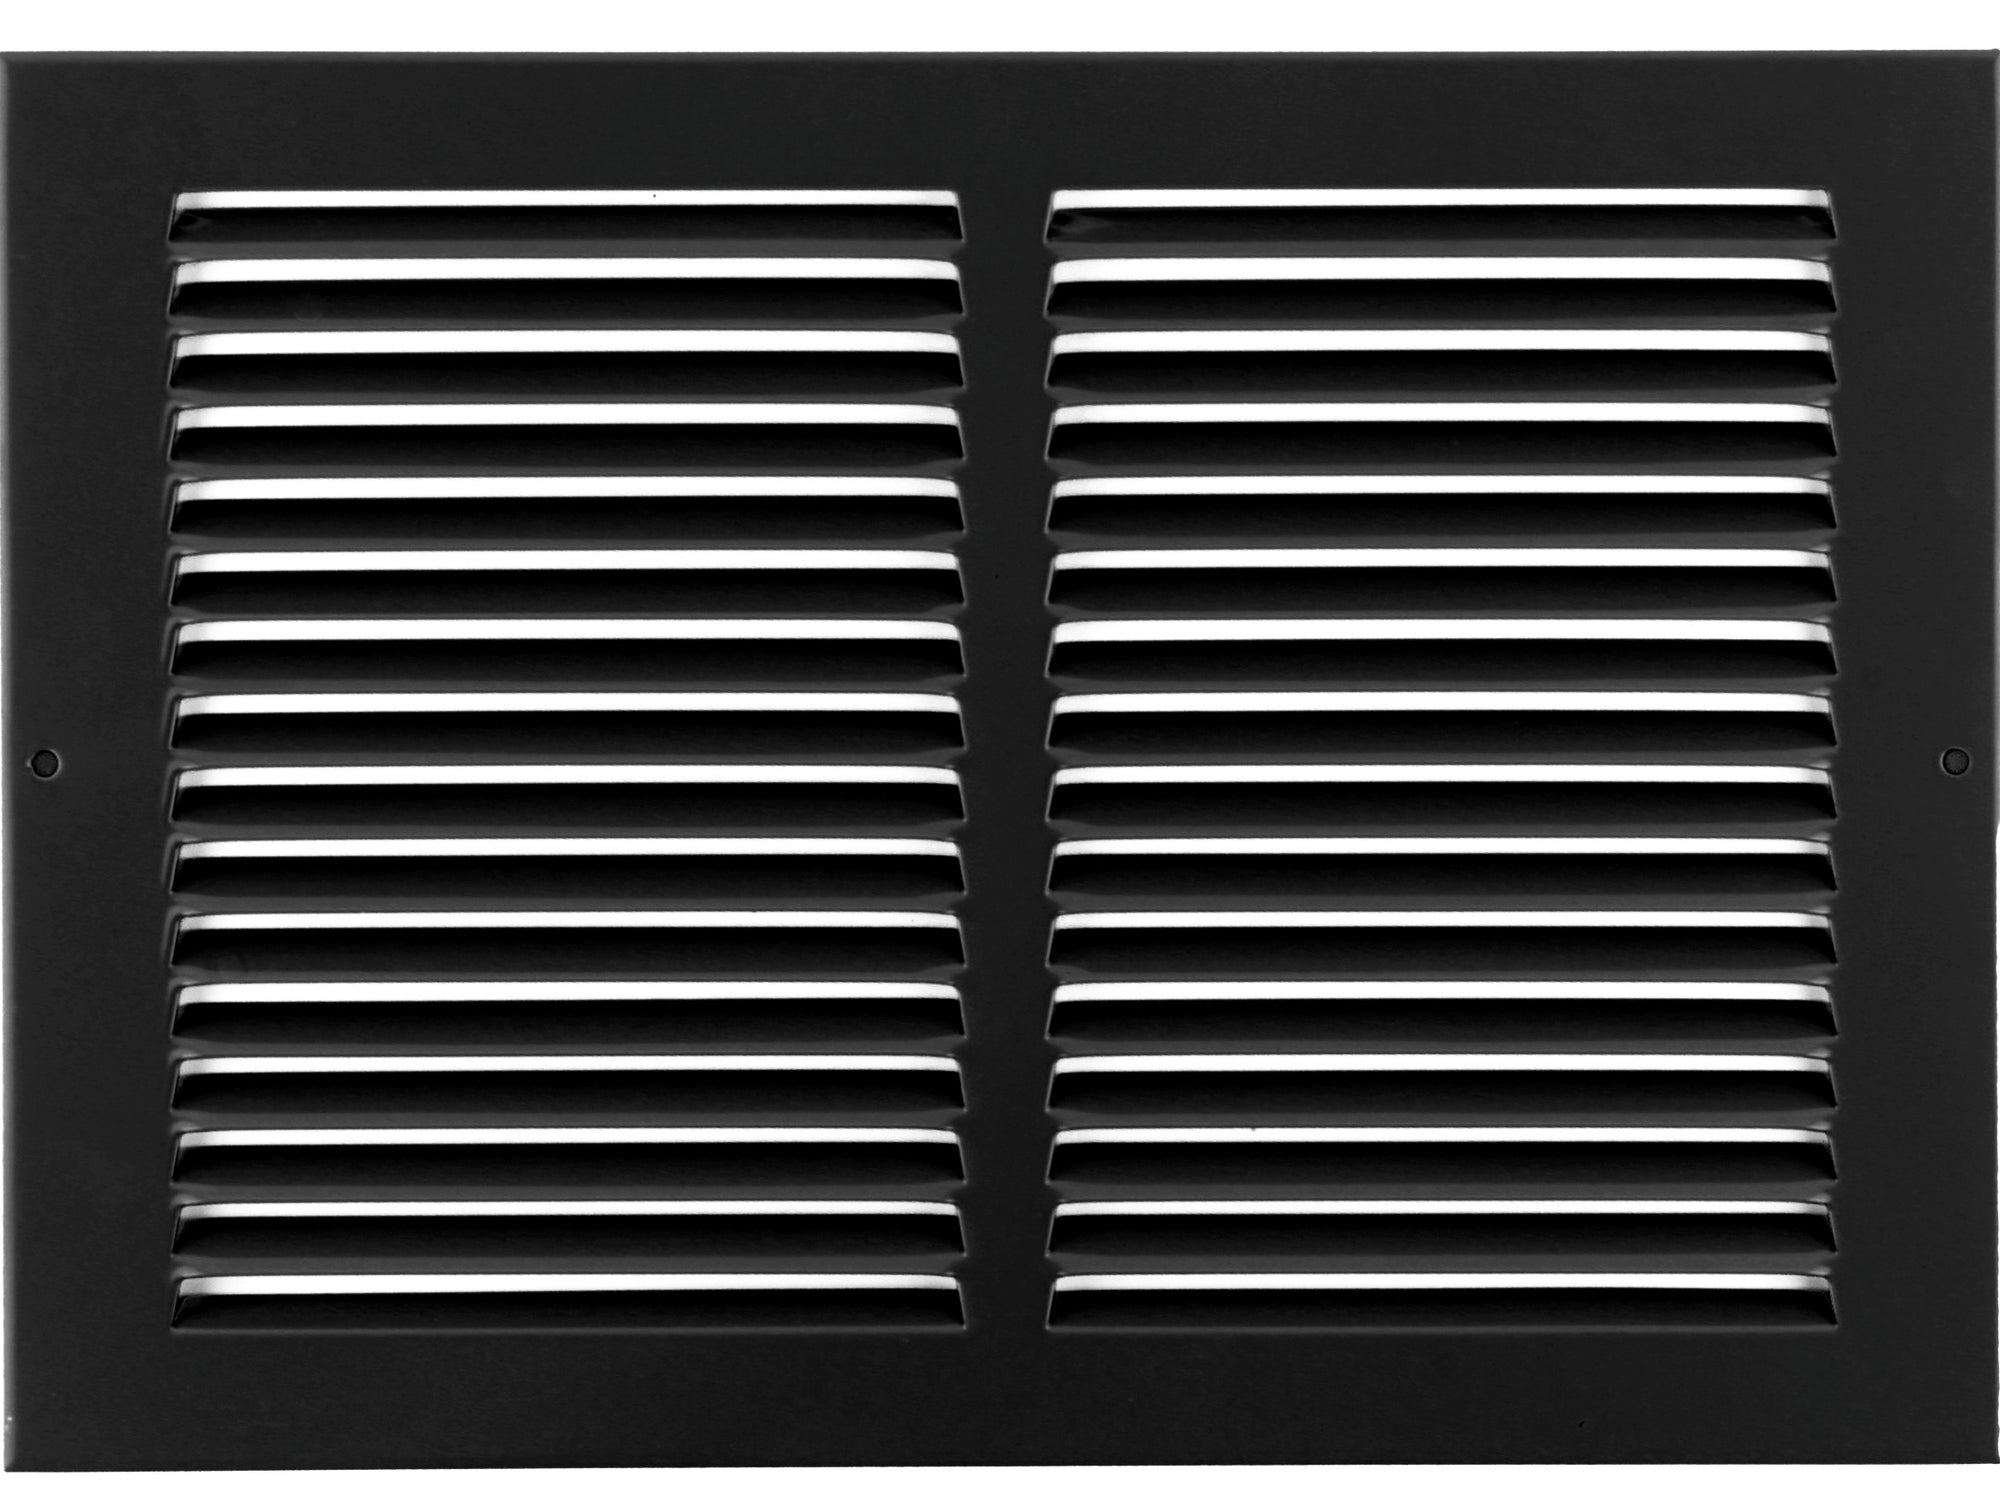 8" X 8" Air Vent Return Grilles - Sidewall and Ceiling - Steel